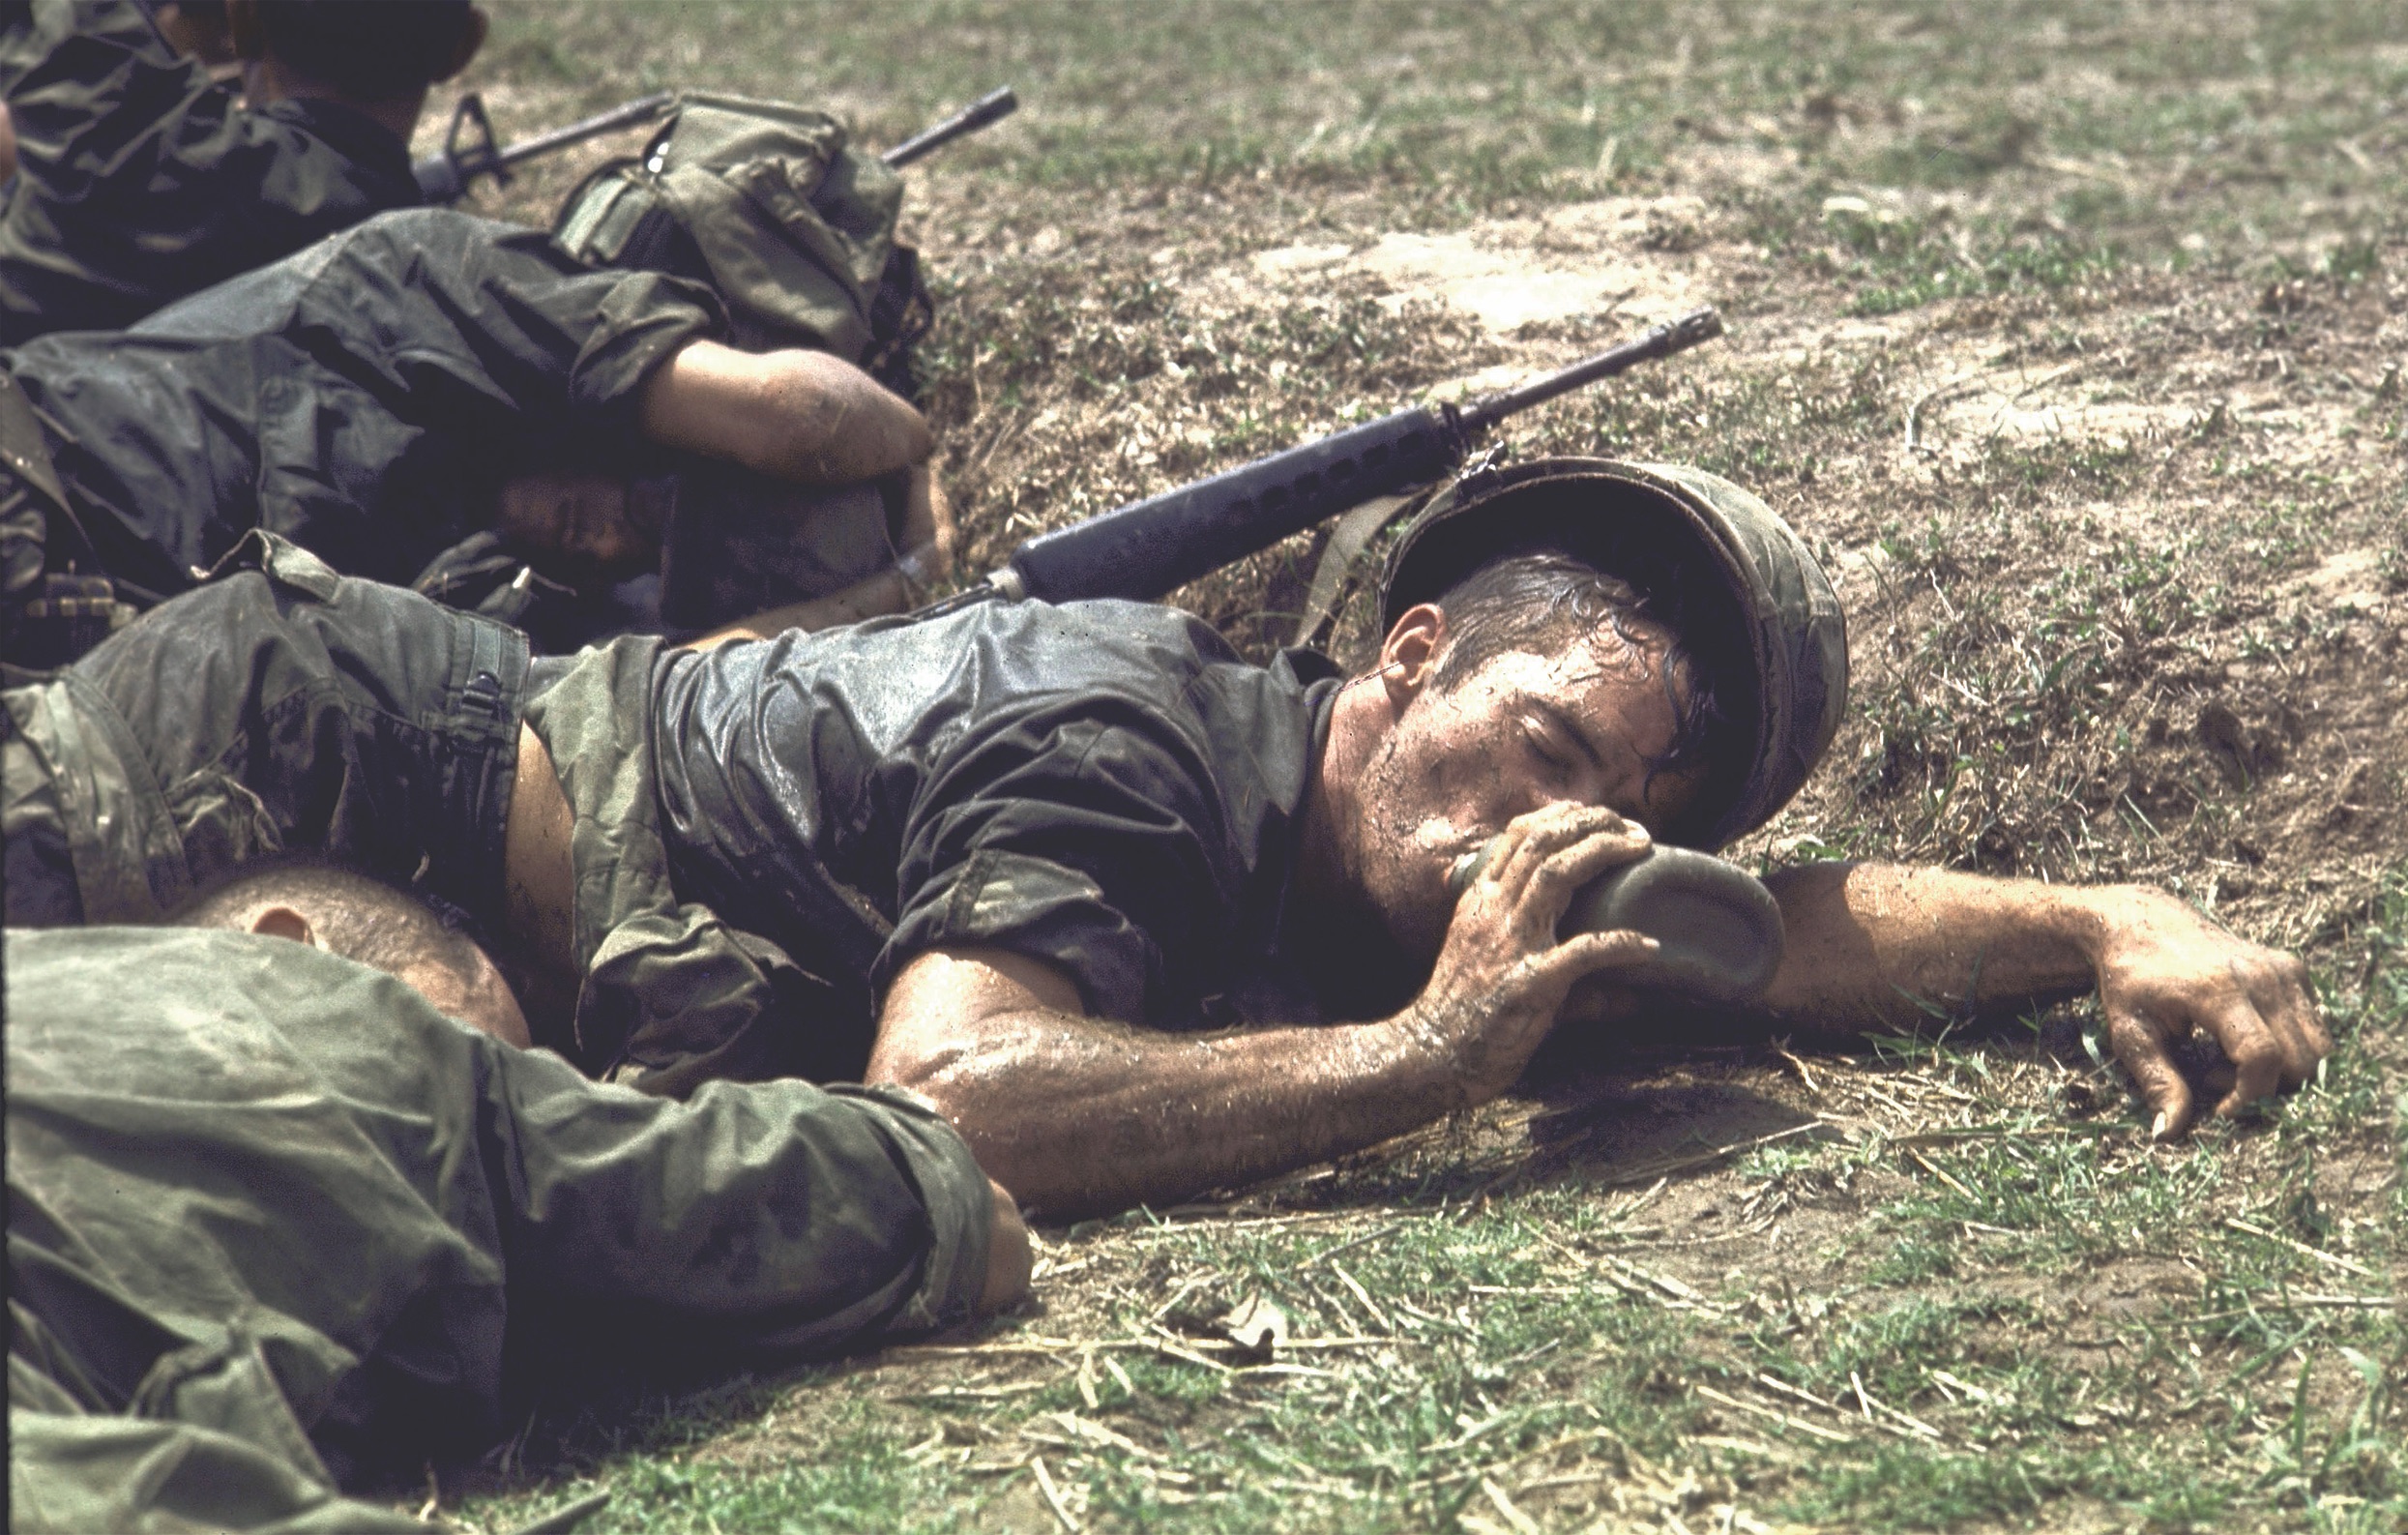 After tough fighting in the Fishhook area, U.S. soldiers from an unidentified unit get a rare chance to rest and take a sip of water. (Larry Burrows/The Life Picture Collection via Getty Images)